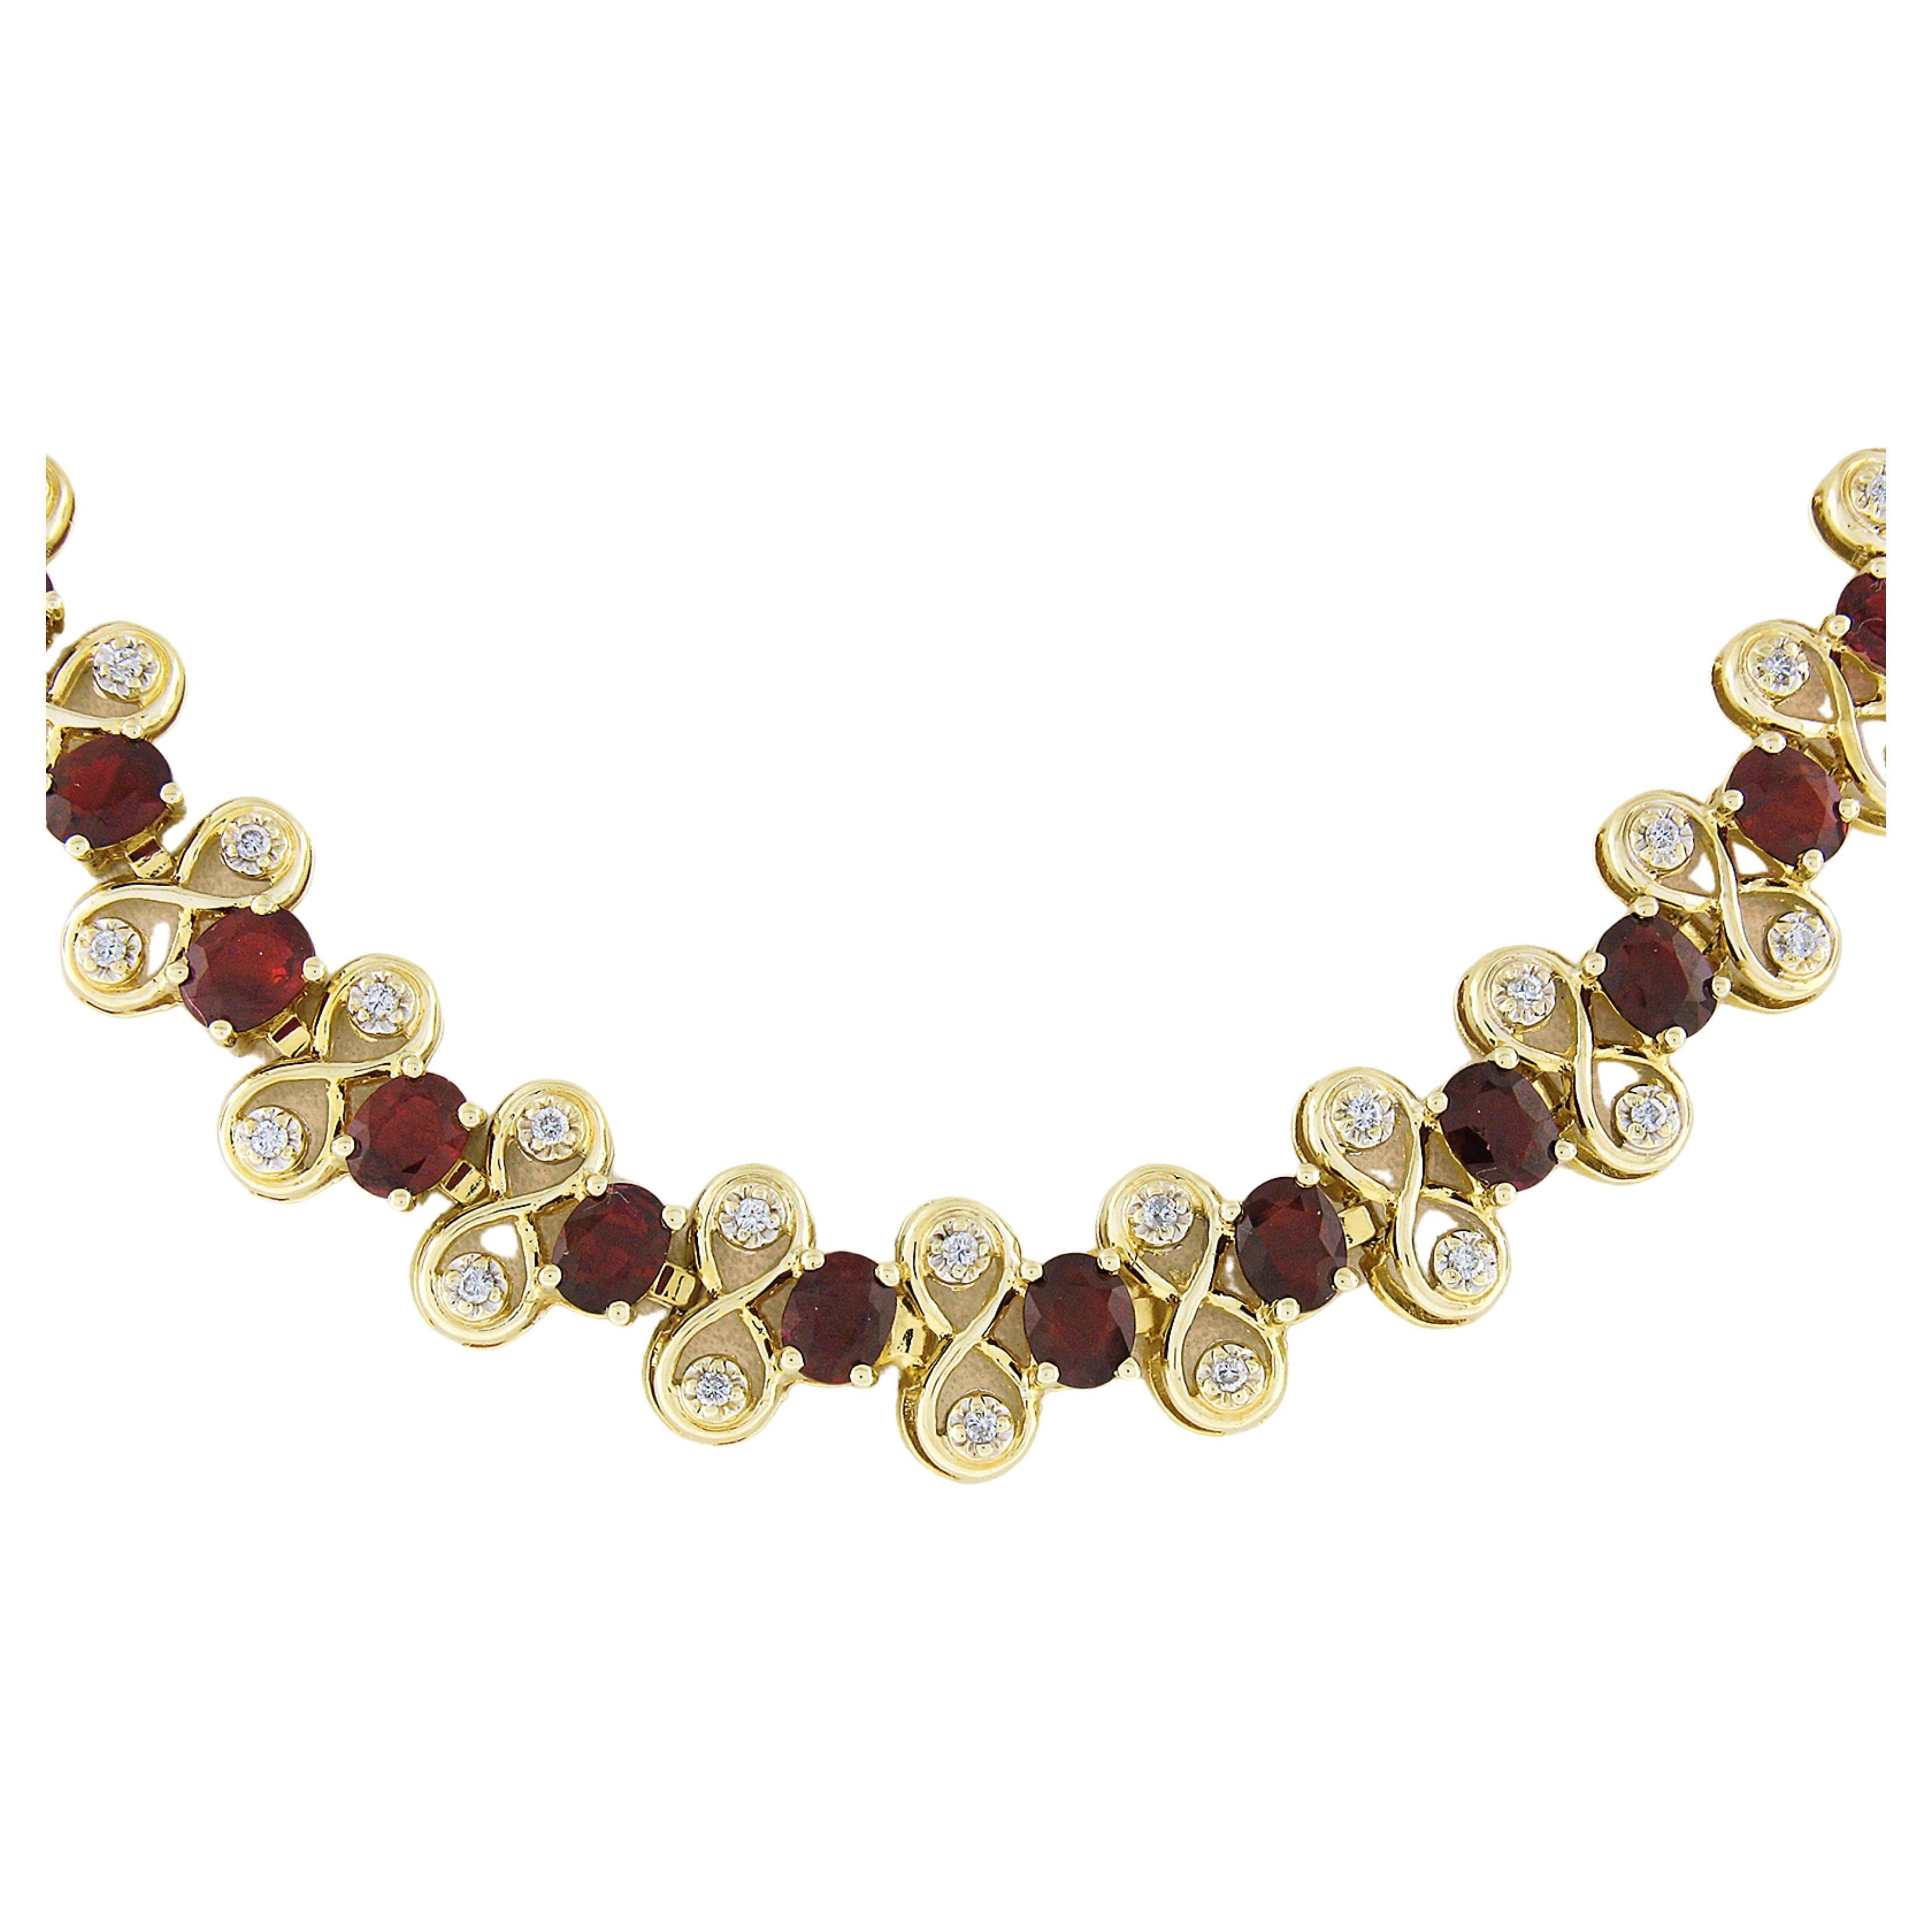 Here we have a gorgeous and well made statement necklace that was crafted from solid 14k yellow gold. The necklace features 51 natural ruby stones that alternate with figure 8 links of which are adorned with fine quality diamonds throughout. Three